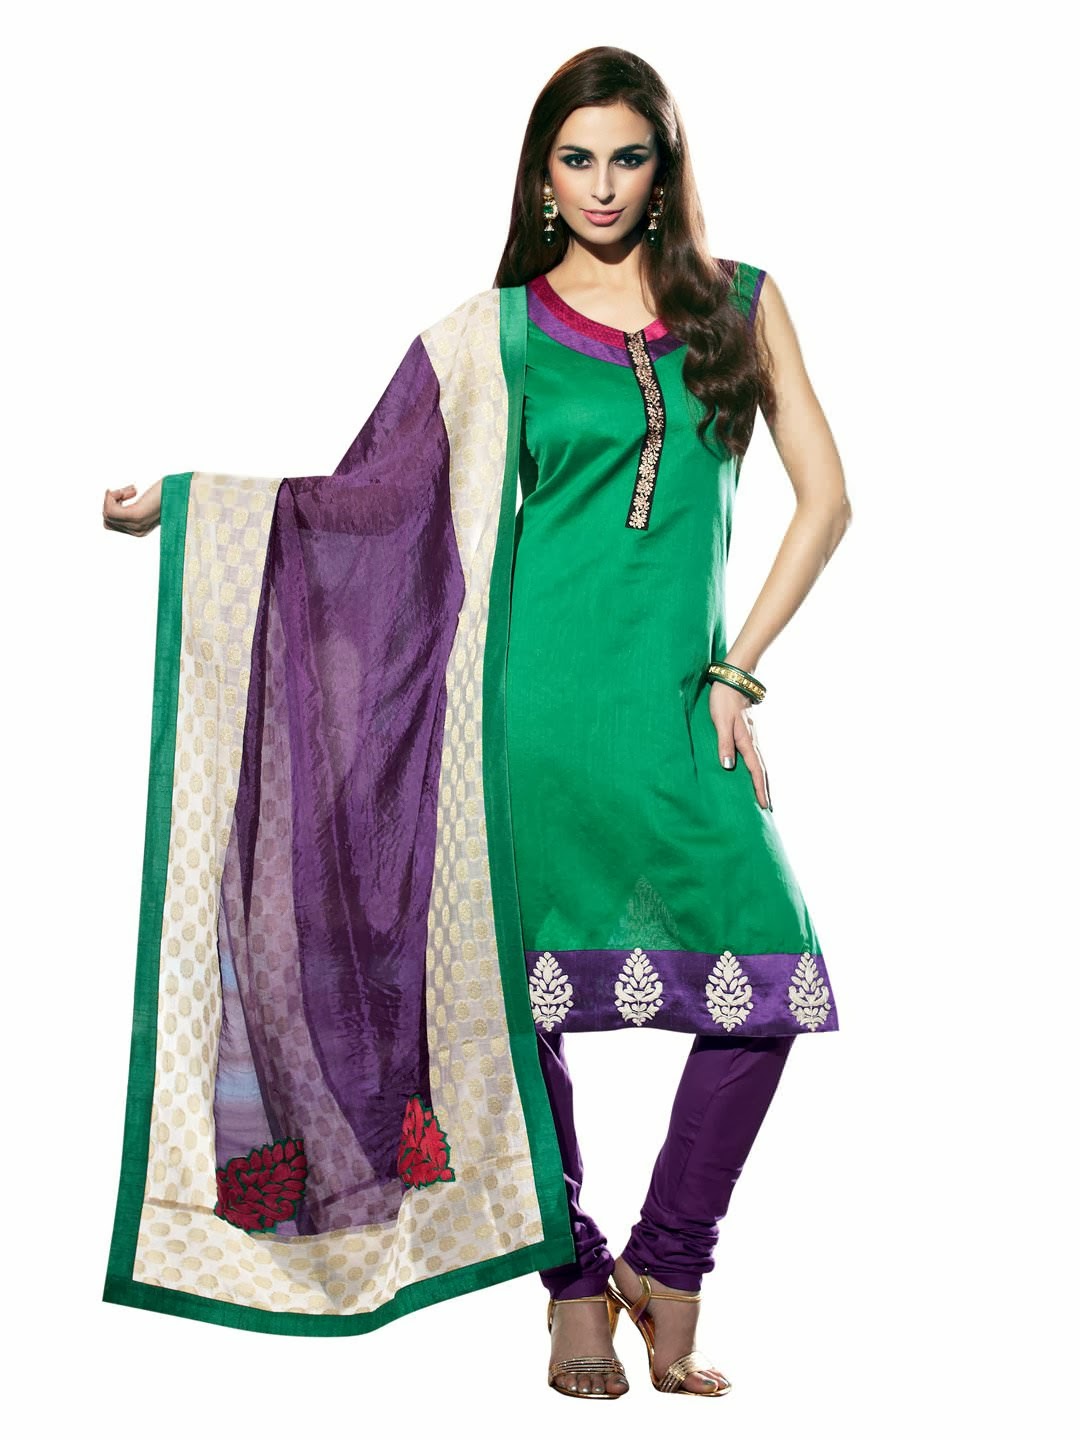 http://linksredirect.com?pub_id=1318CL1274&url=http%3A//www.myntra.com/dress-material/span/span-women-green-purple-embroidered-dress-material/102507/buy%3Ft_code%3D151af94bbdd70a7a9058507dd59c915e%26previous_style_id%3D102514%26previous_recommendation_type%3Davail%26previous_recommendation_styleids%3D127305%2C102507%2C102481%2C127317%2C102516%26src%3Dpp